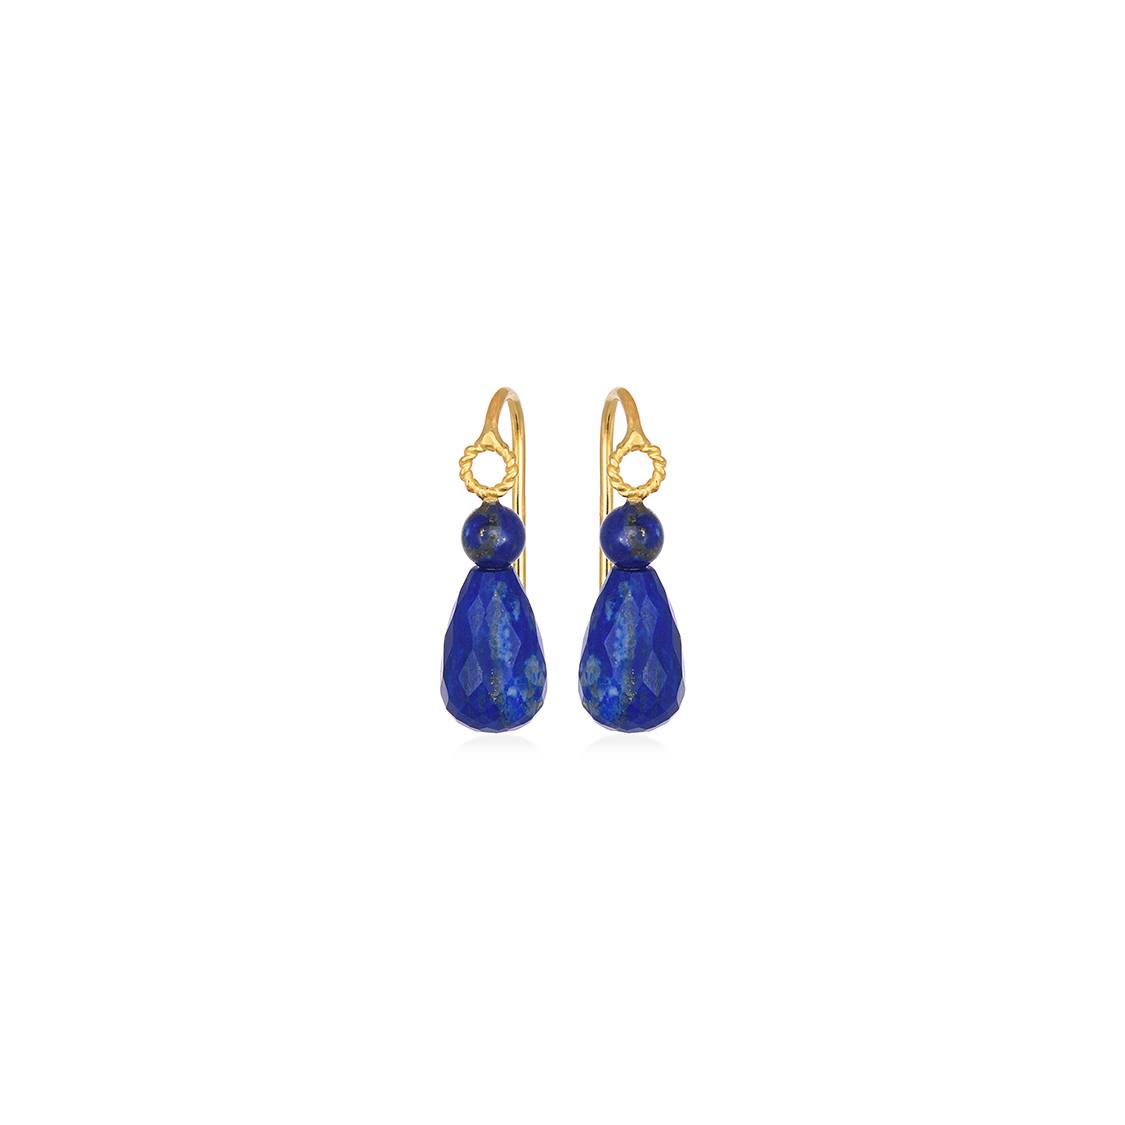 Small drop earrings with lapis